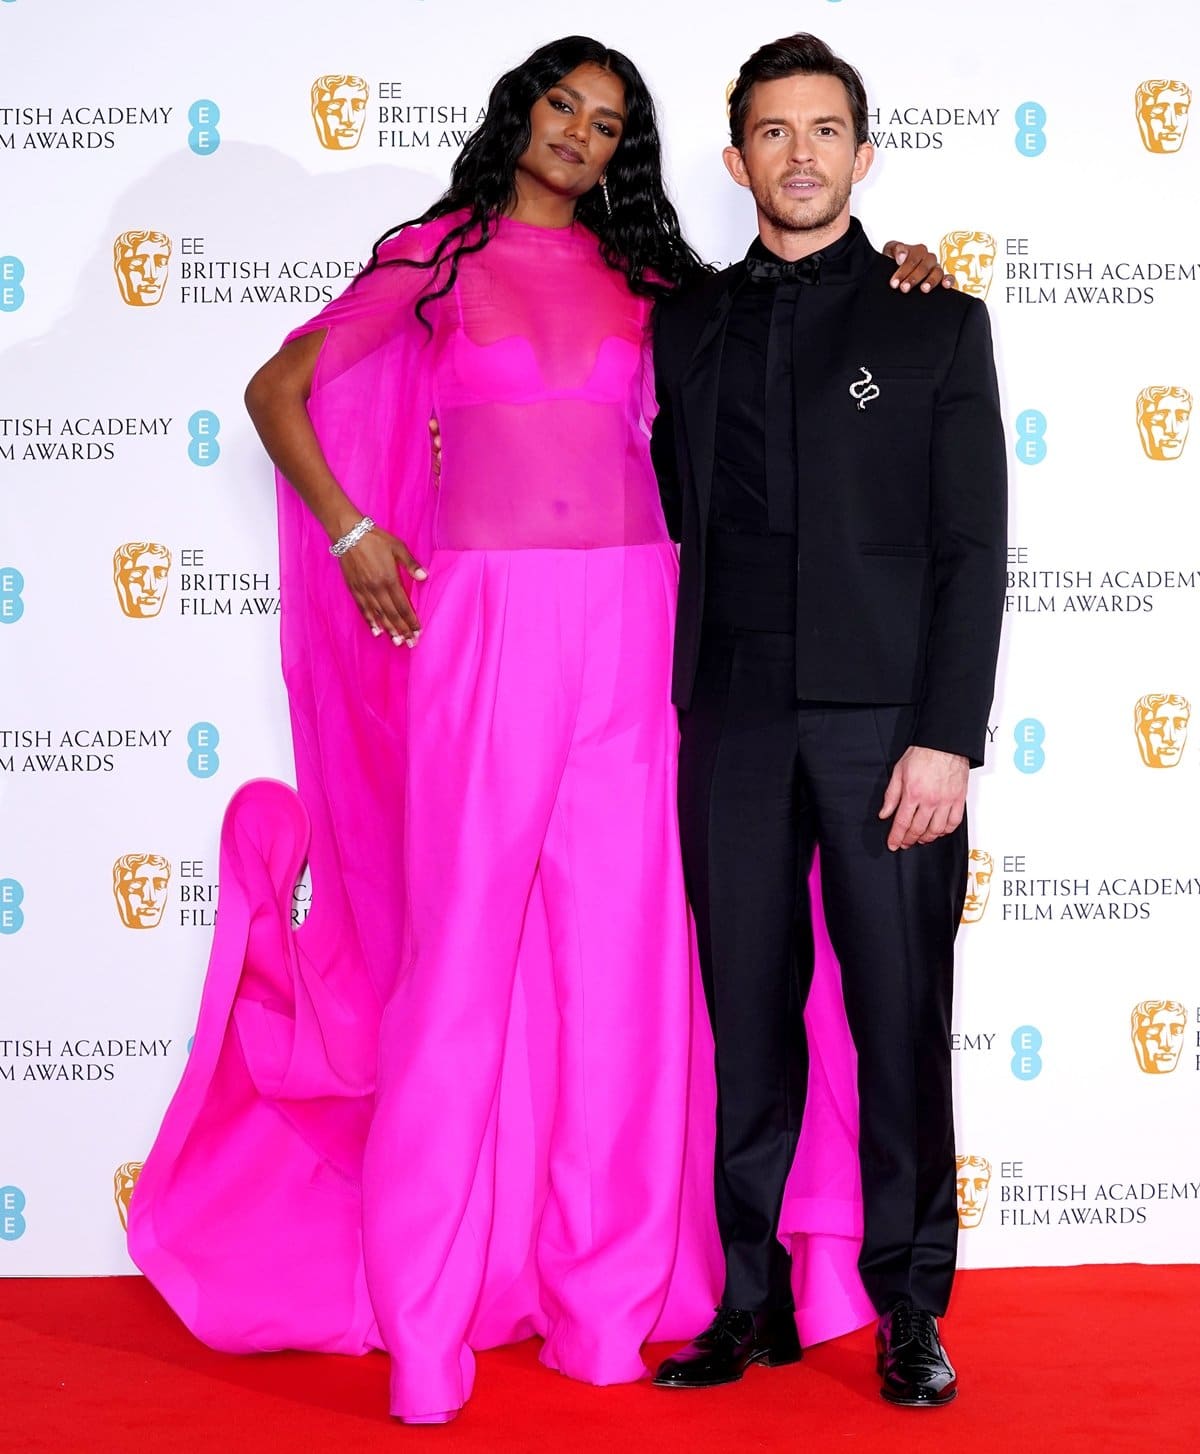 Simone Ashley in a pink Valentino dress and her Bridgerton co-star Jonathan Bailey in Dior at the 2022 EE British Academy Film Awards